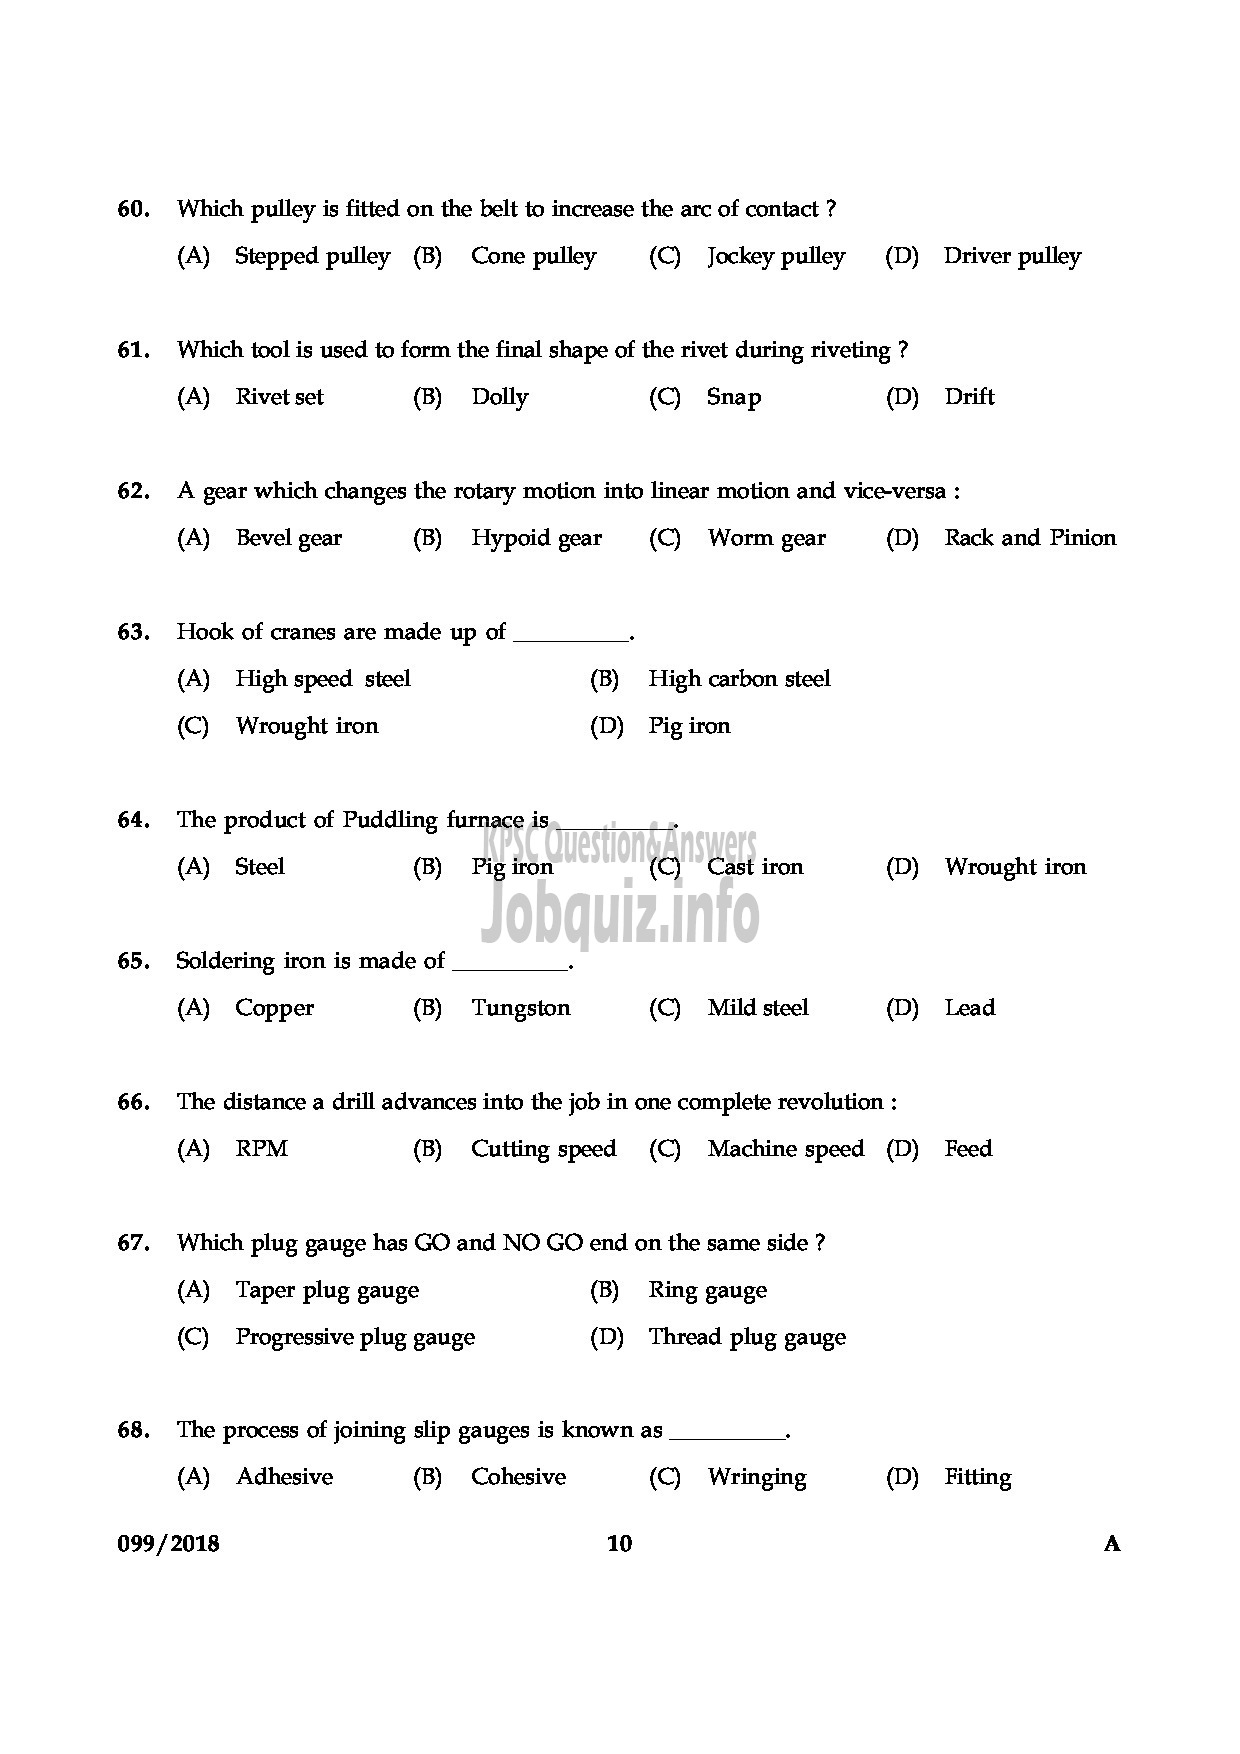 Kerala PSC Question Paper - JUNIOR INSTRUCTOR FITTER INDUSTRIAL TRAINING ENGLISH -10